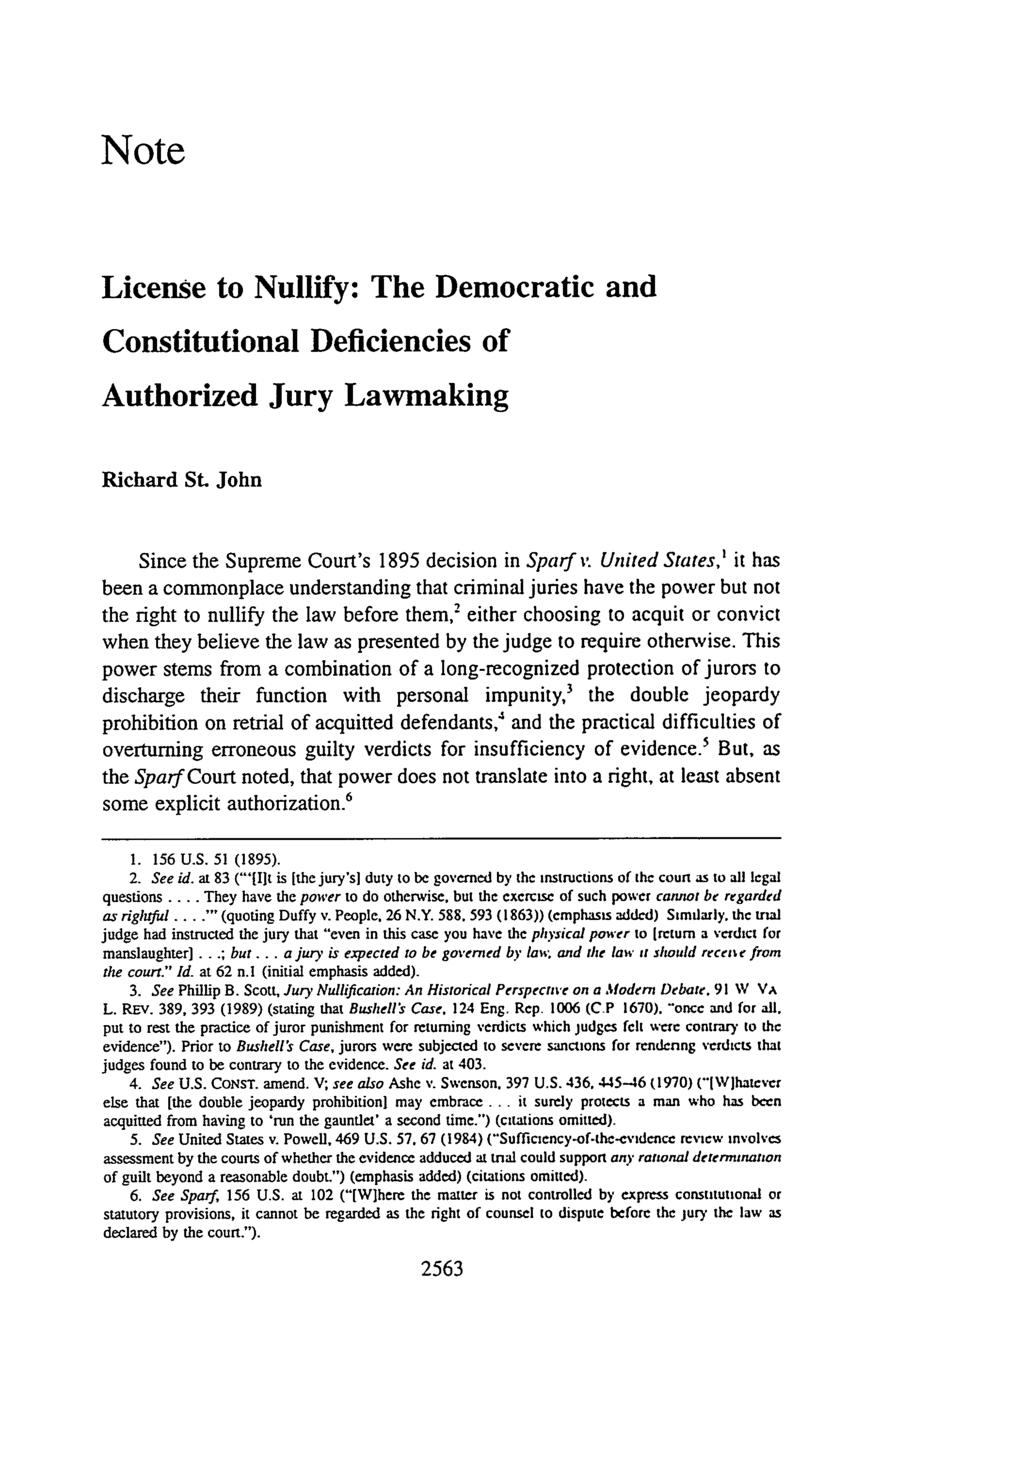 Note License to Nullify: The Democratic and Constitutional Deficiencies of Authorized Jury Lawmaking Richard St. John Since the Supreme Court's 1895 decision in Sparf v.